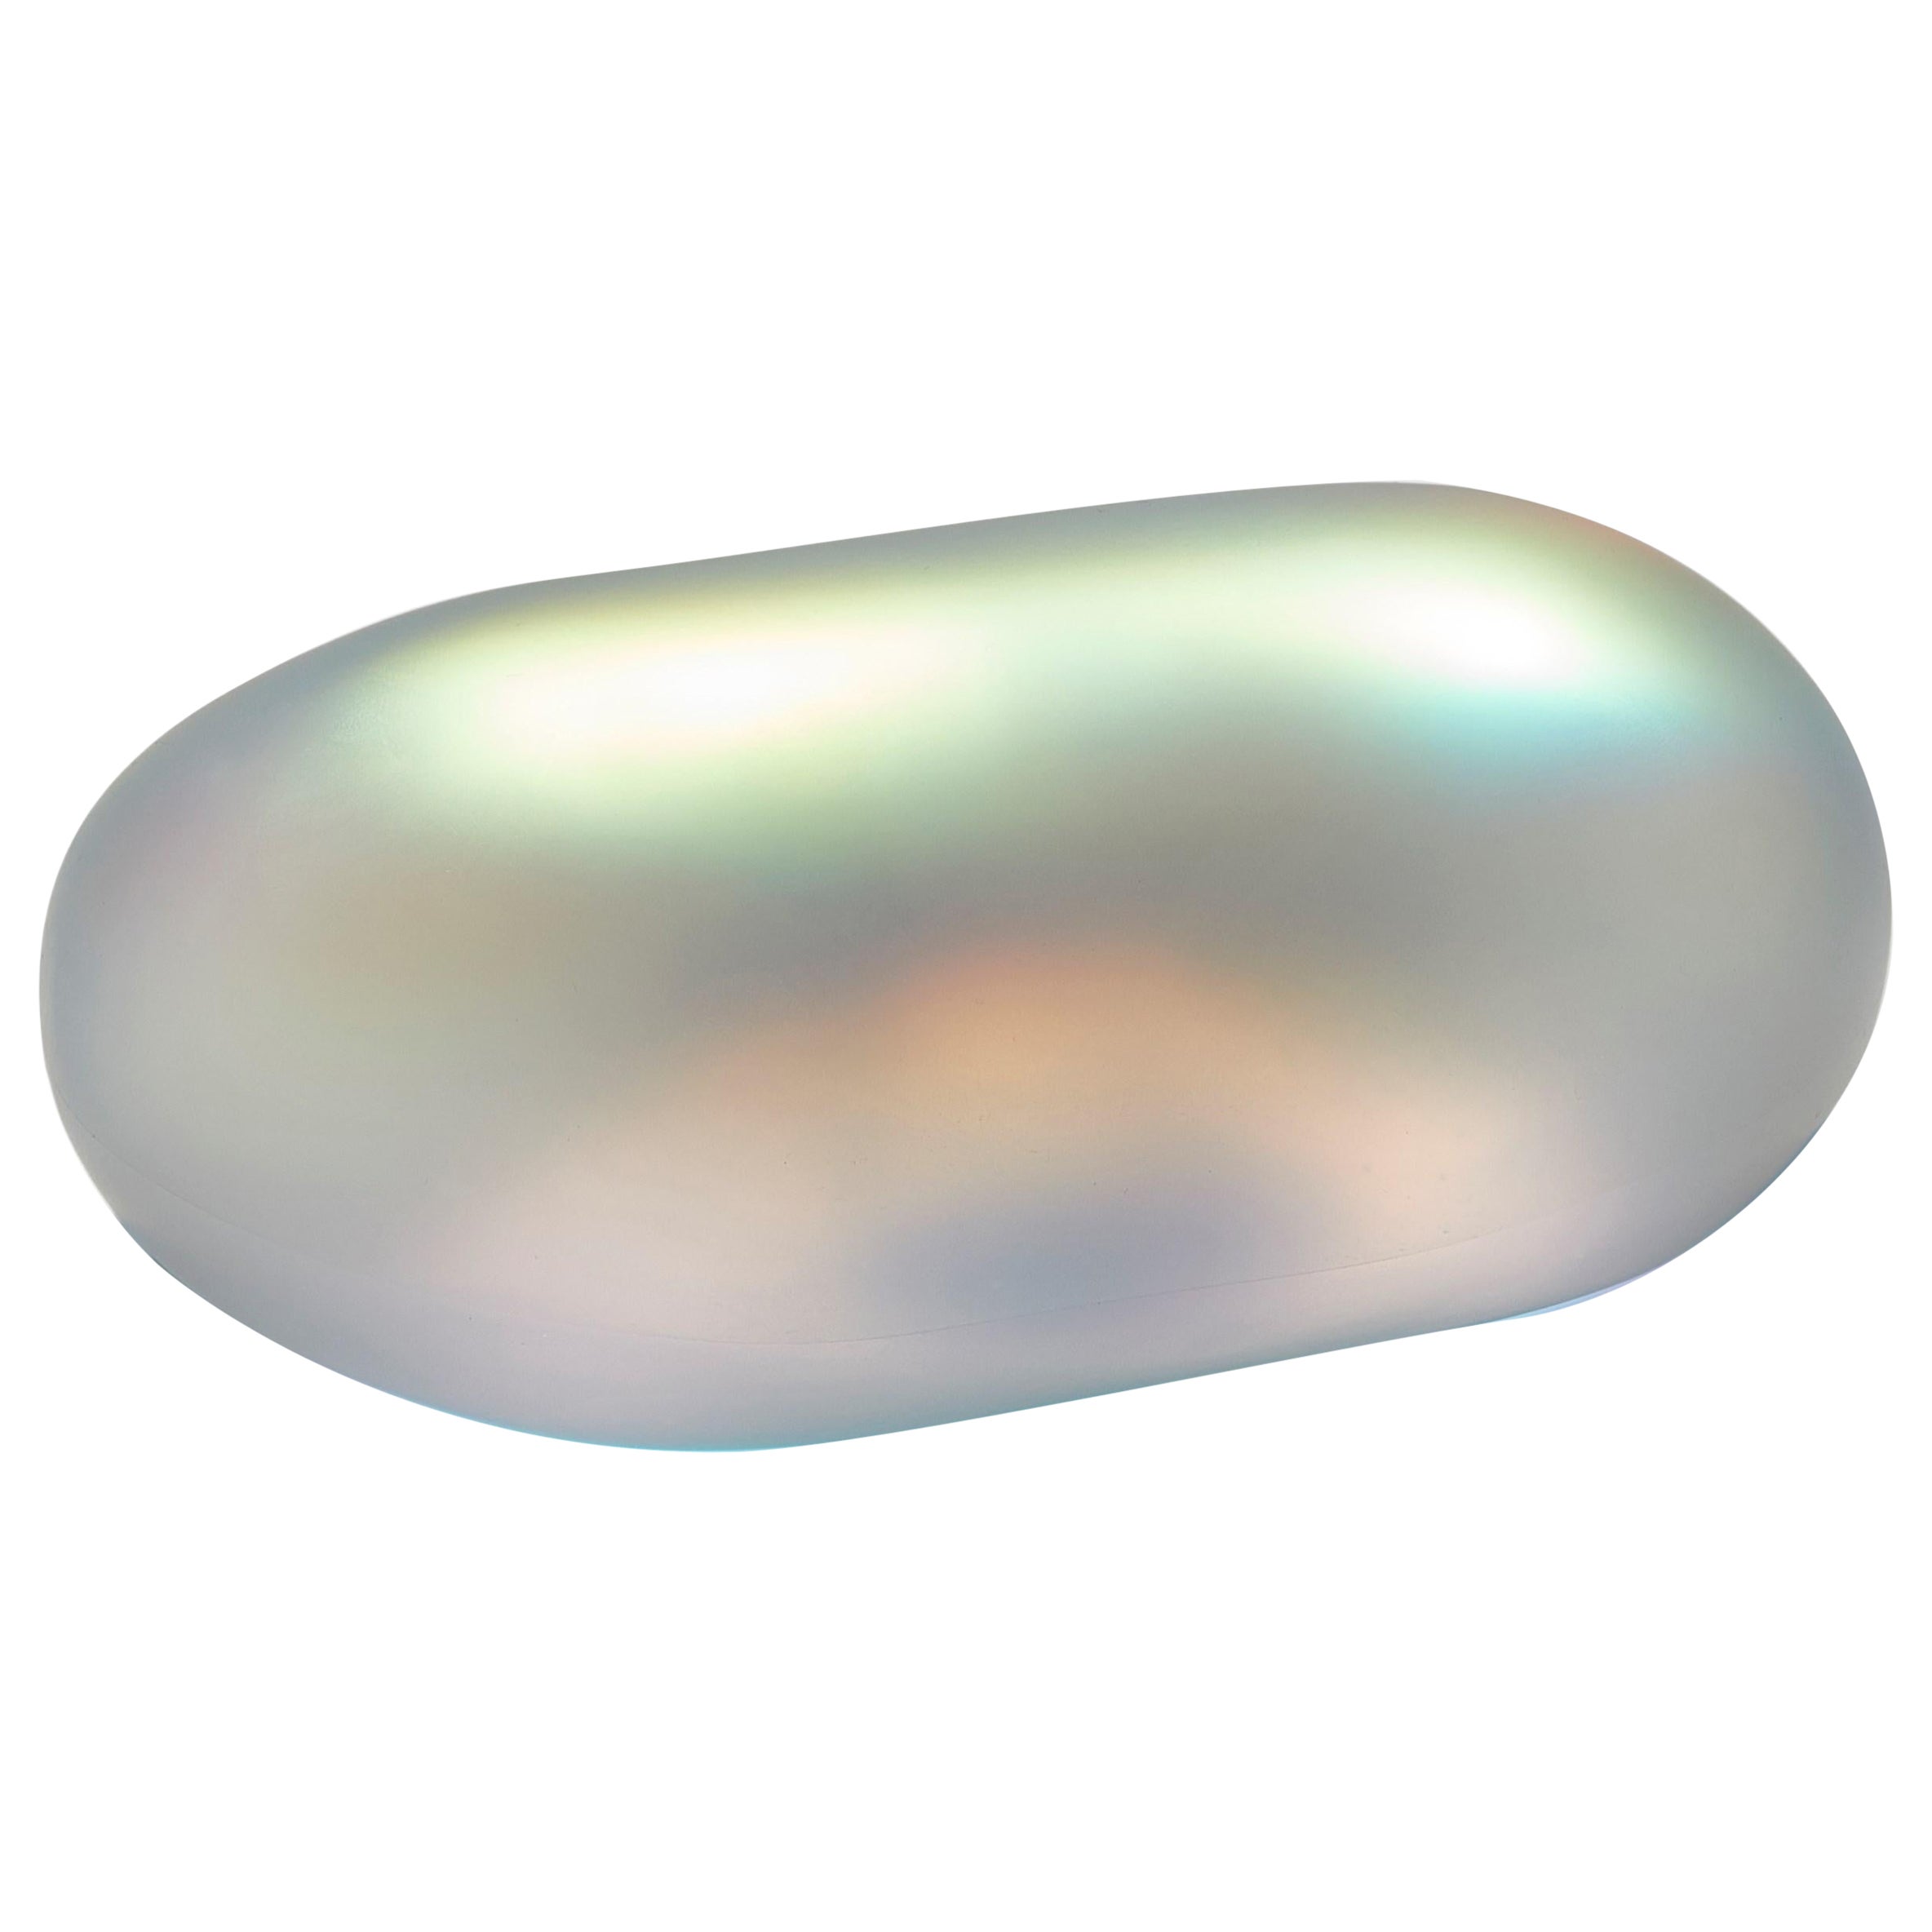  Moon-rock 013, clear glass sculptural rock with iridescent colours by Jon Lewis